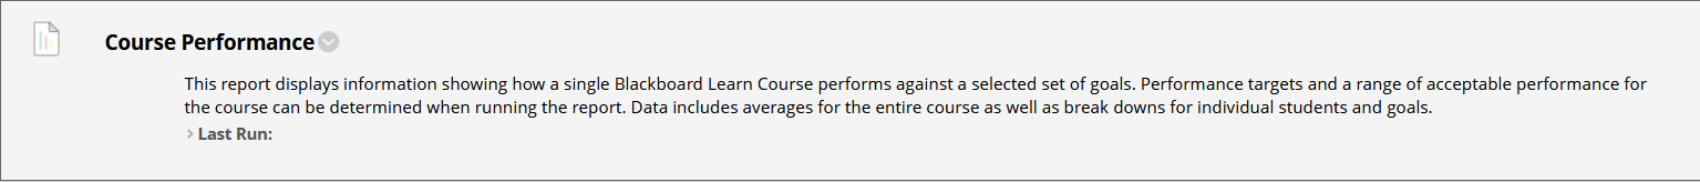 course performance